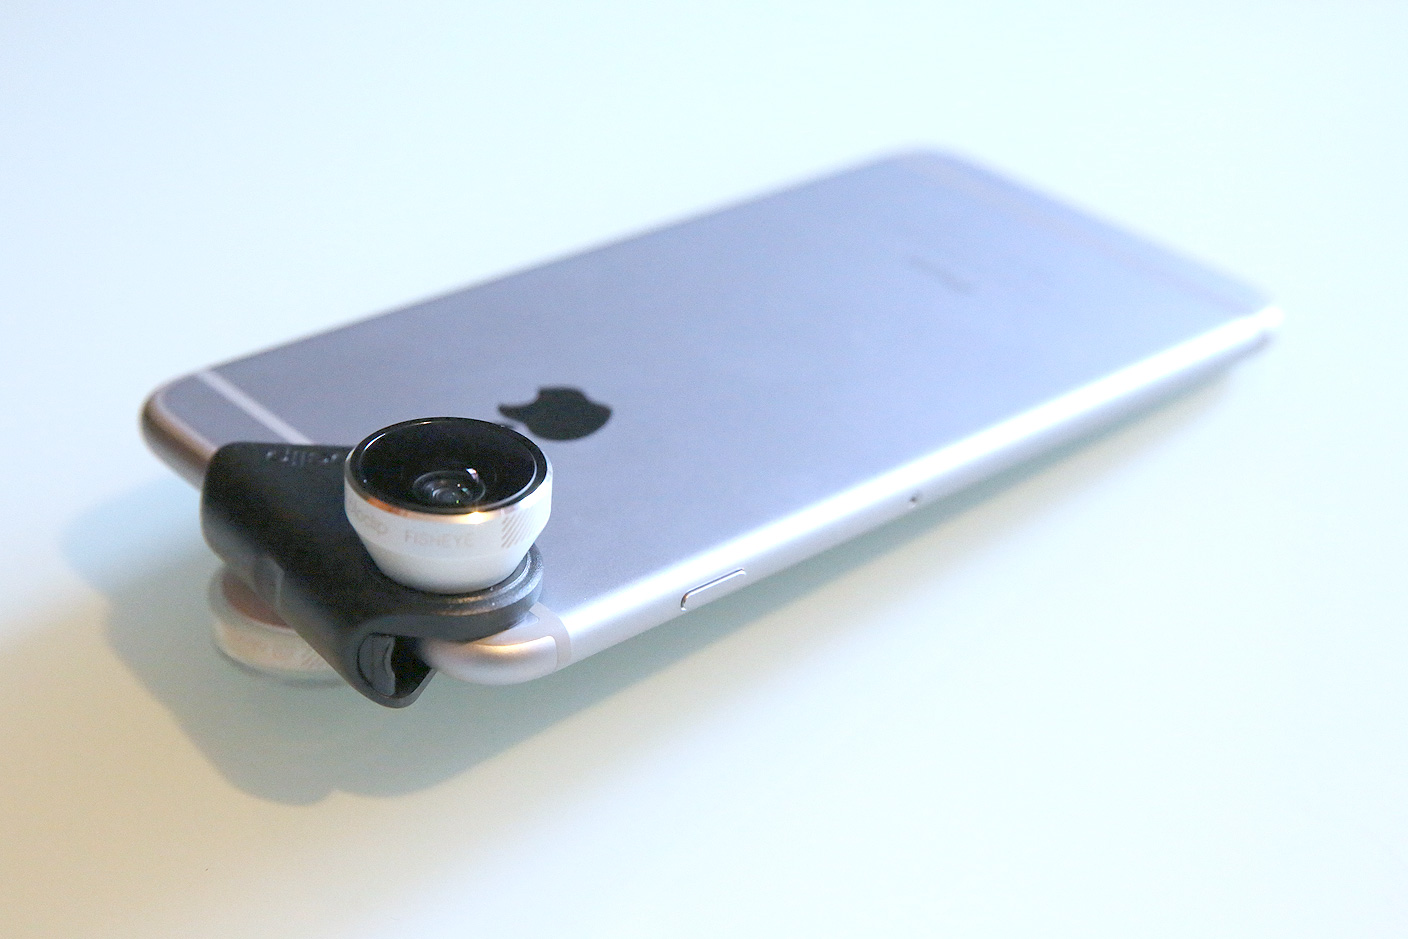 erven Soedan Scully Review: Olloclip 4-in-1 Lens for iPhone 6/6 Plus hangs wide-angle + macro  lenses from your neck - 9to5Mac